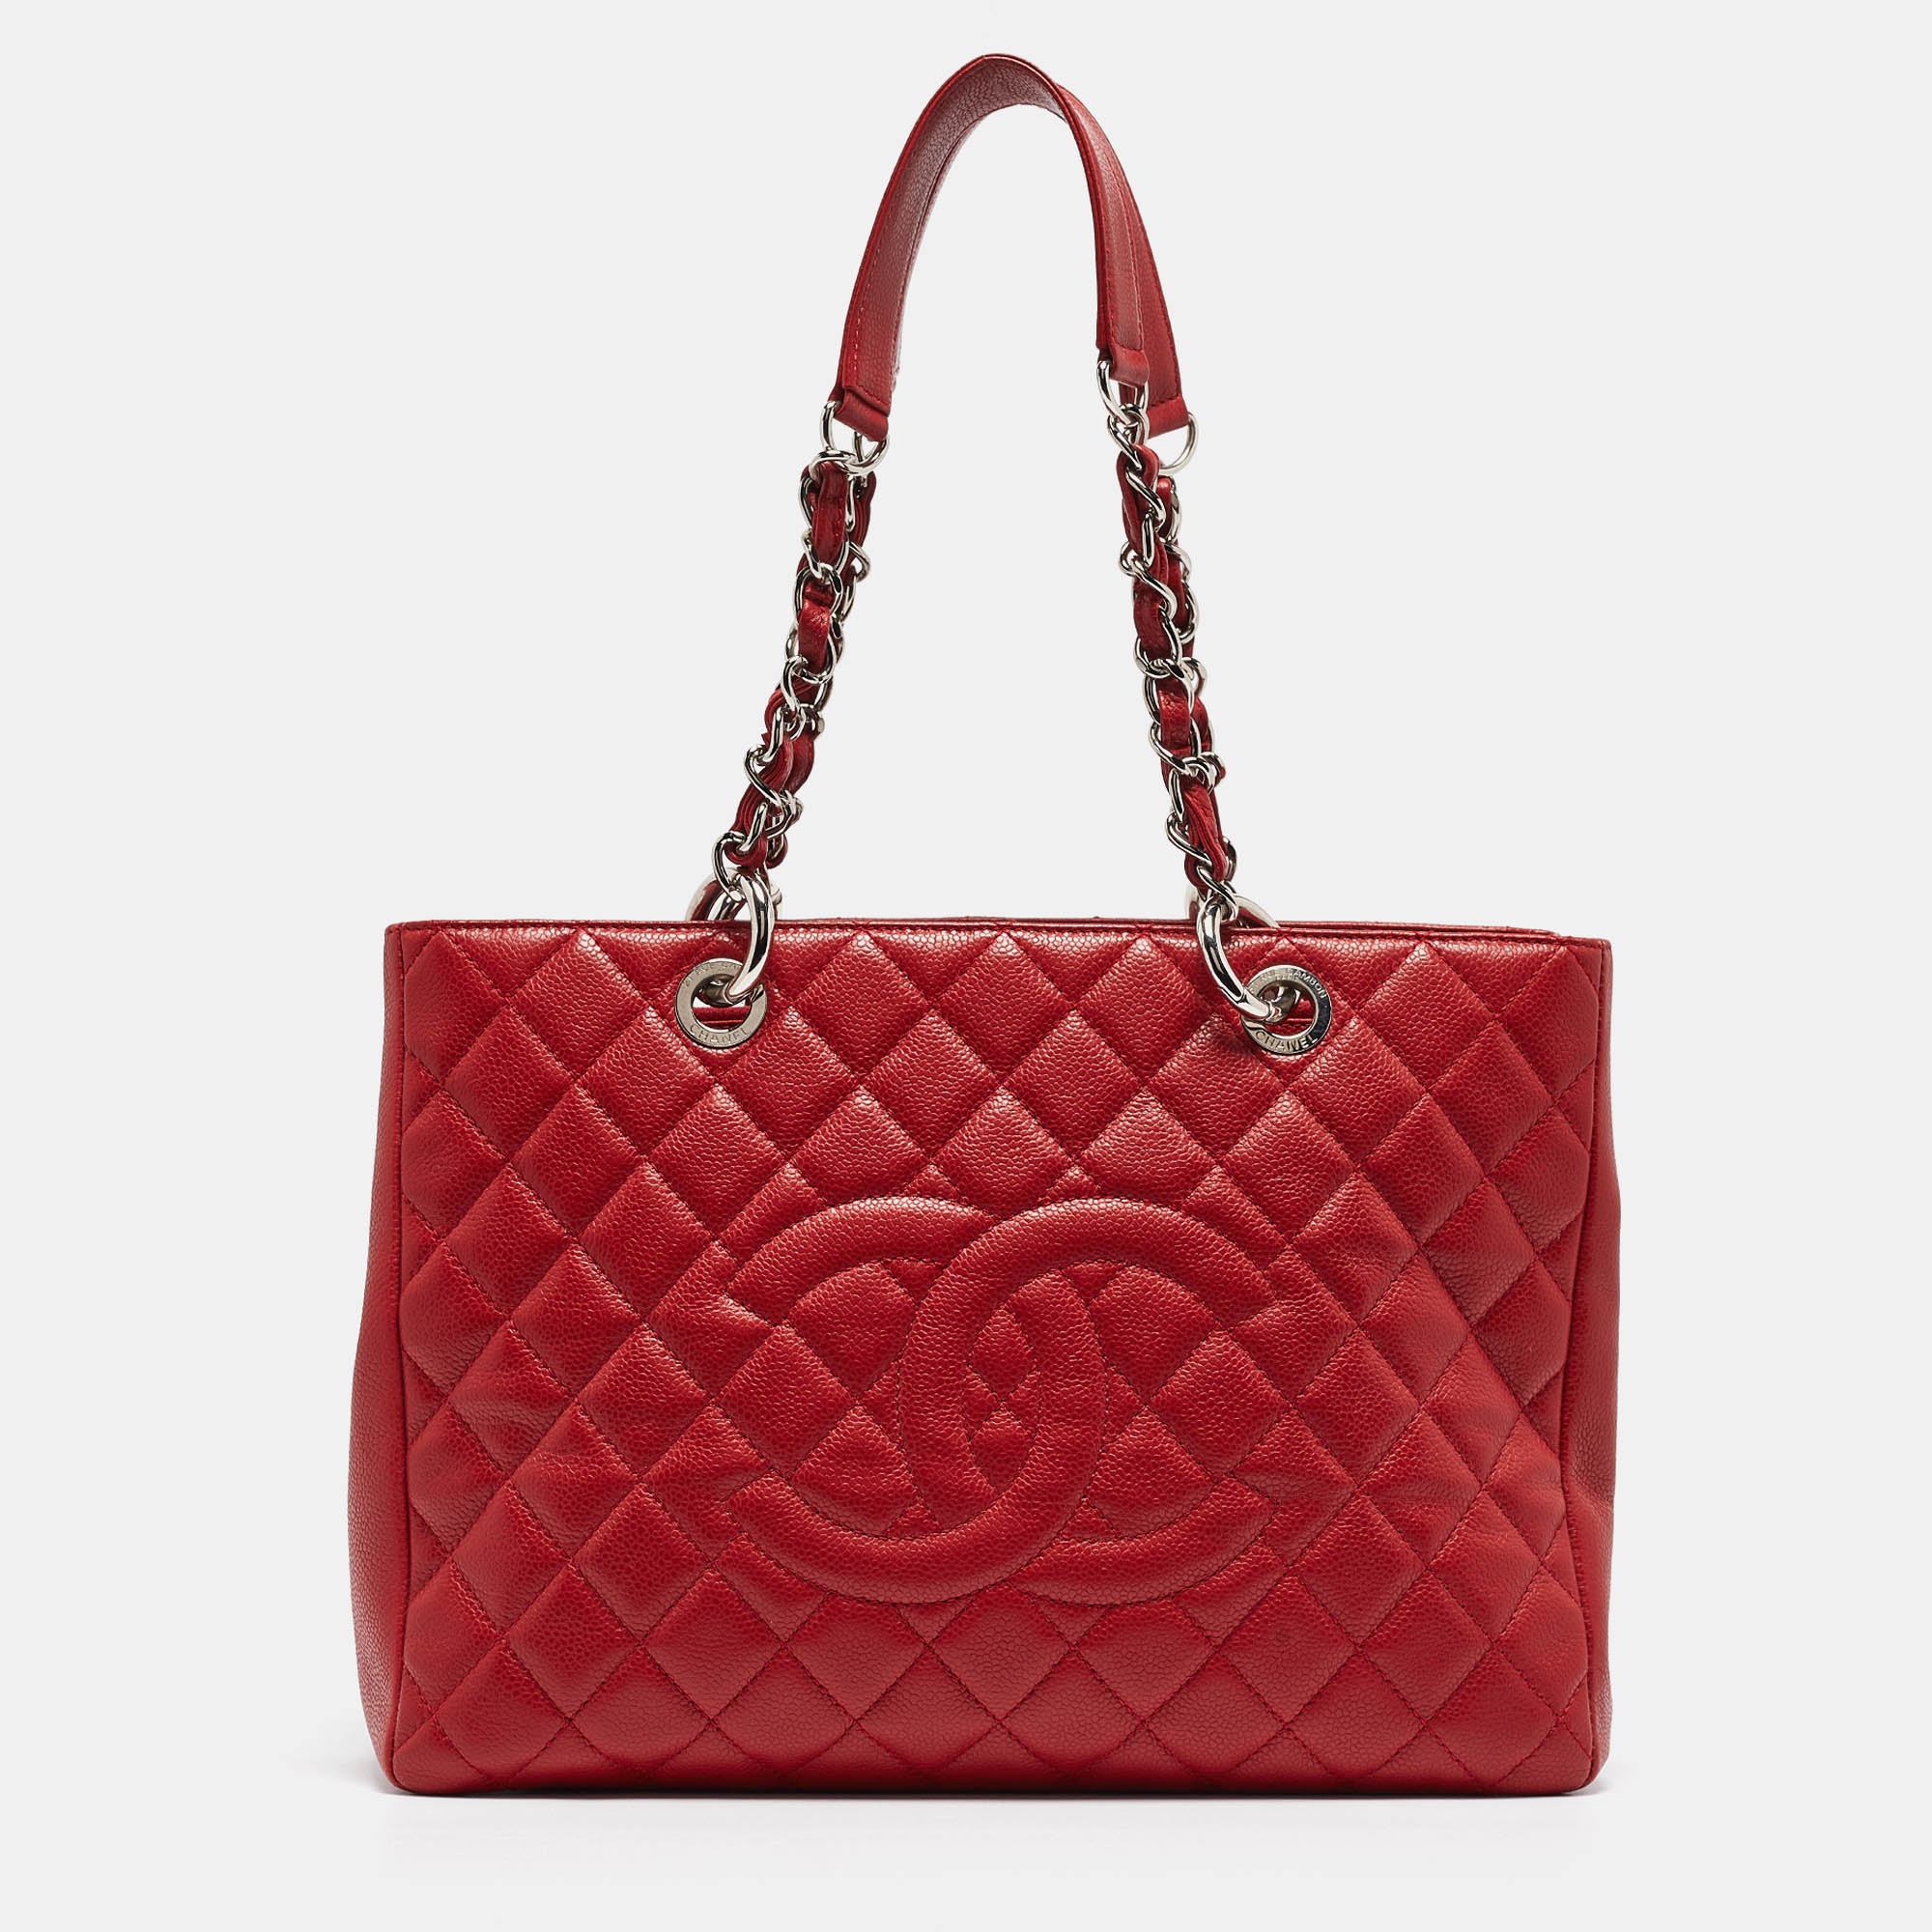 

Chanel Red Quilted Caviar Leather Grand Shopper Tote